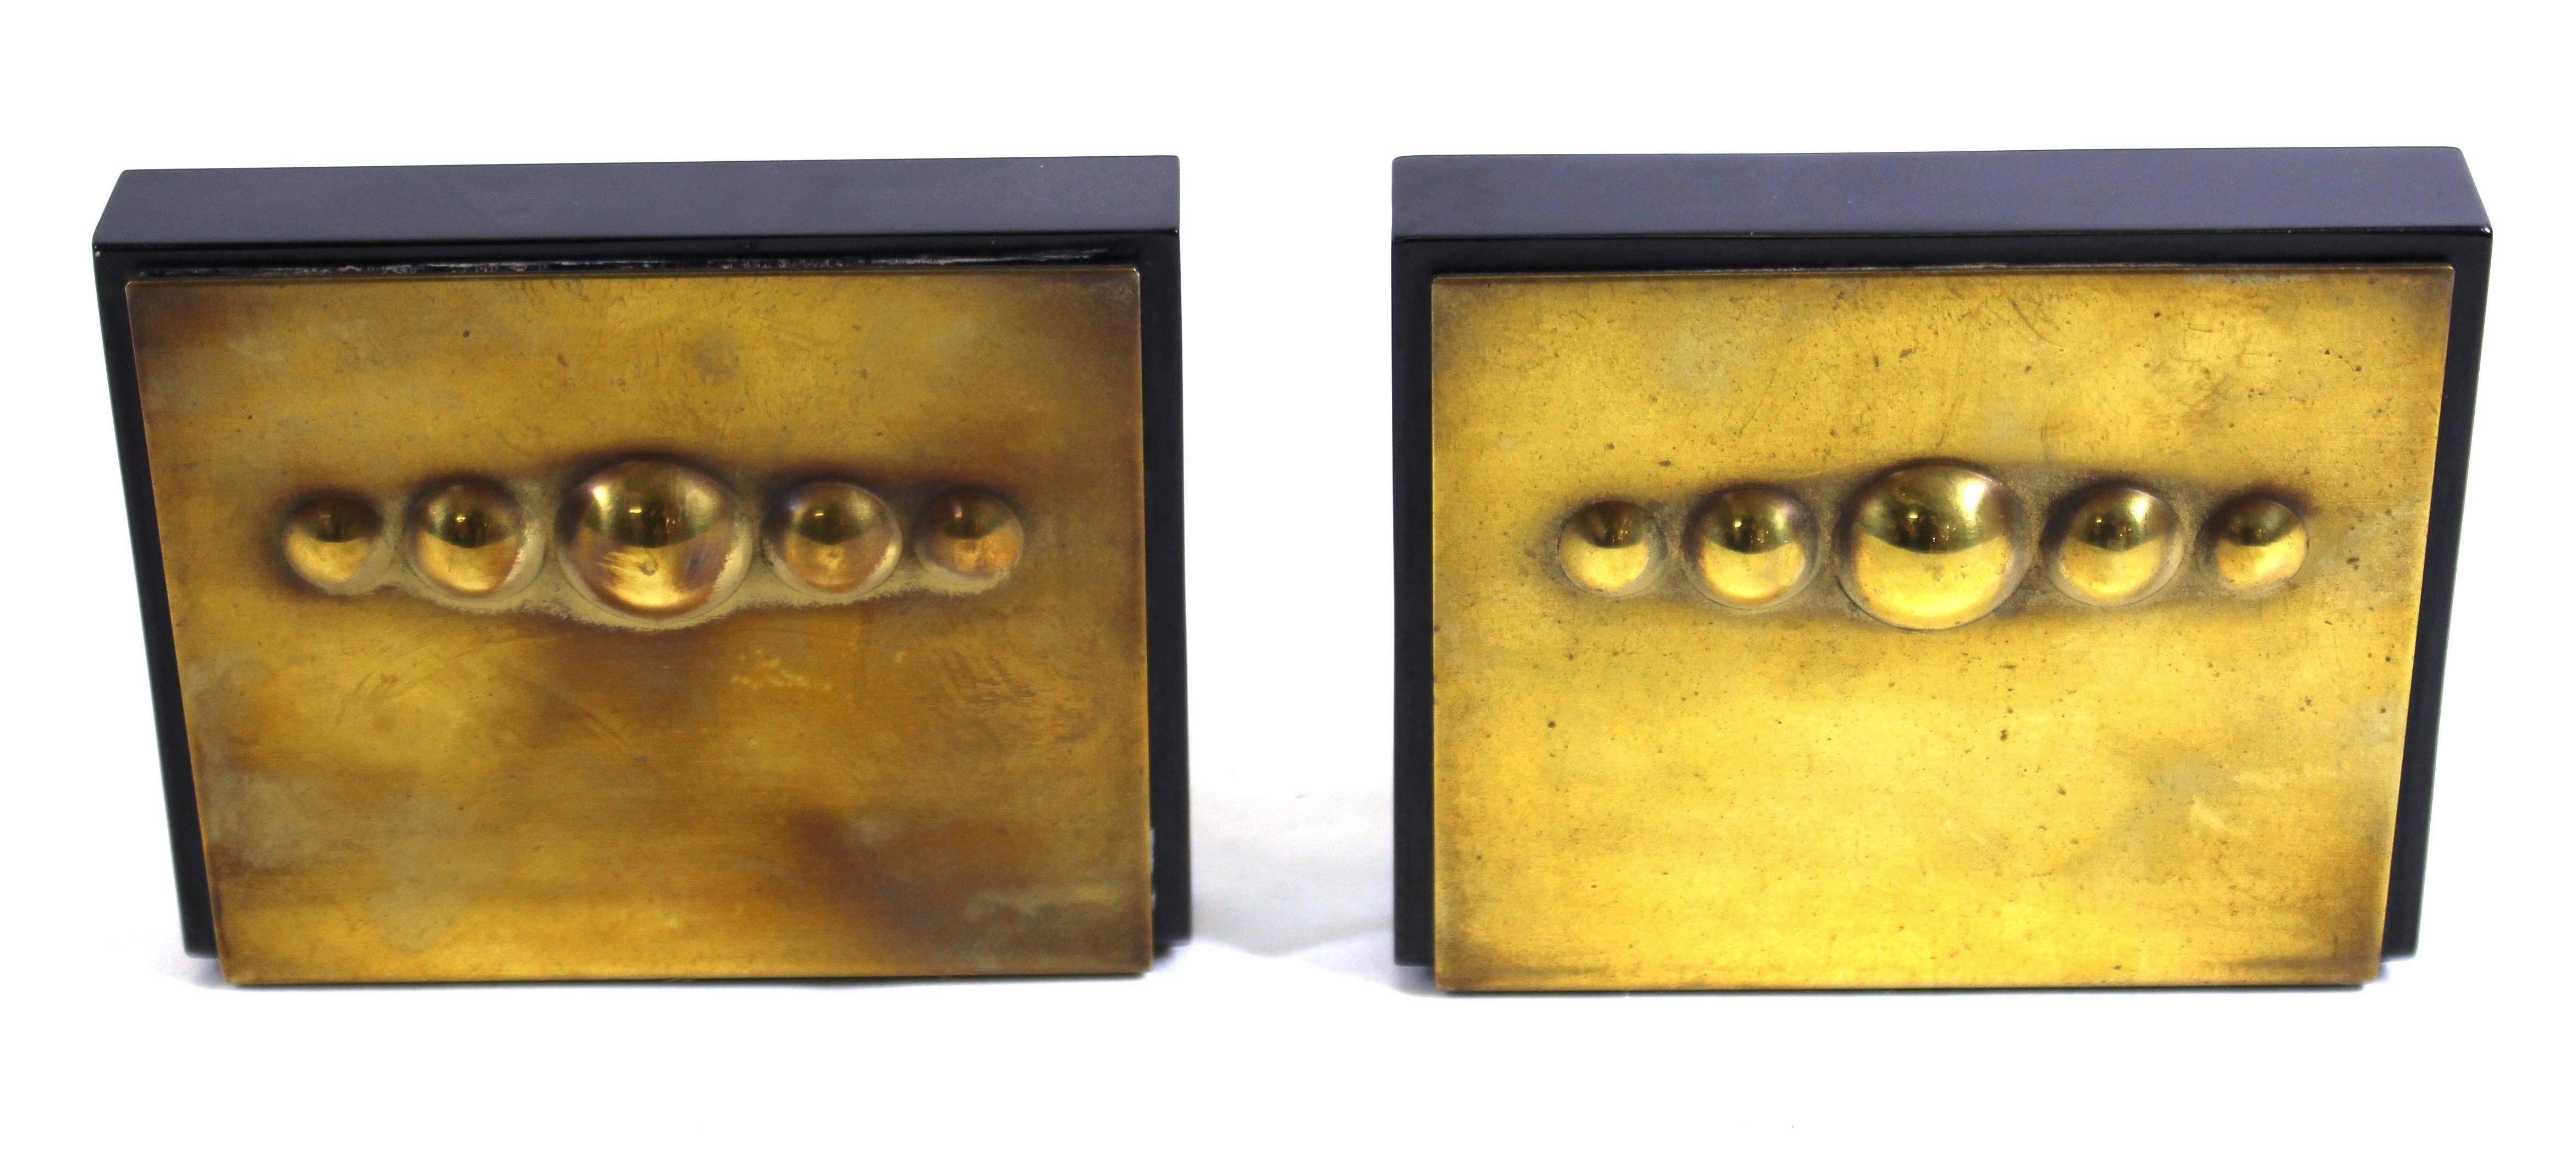 American Modernist period pair of bookends made in solid Bakelite with decorative brass front plates. The pair was made during the 1940s and is in great vintage condition with age-appropriate wear and use.